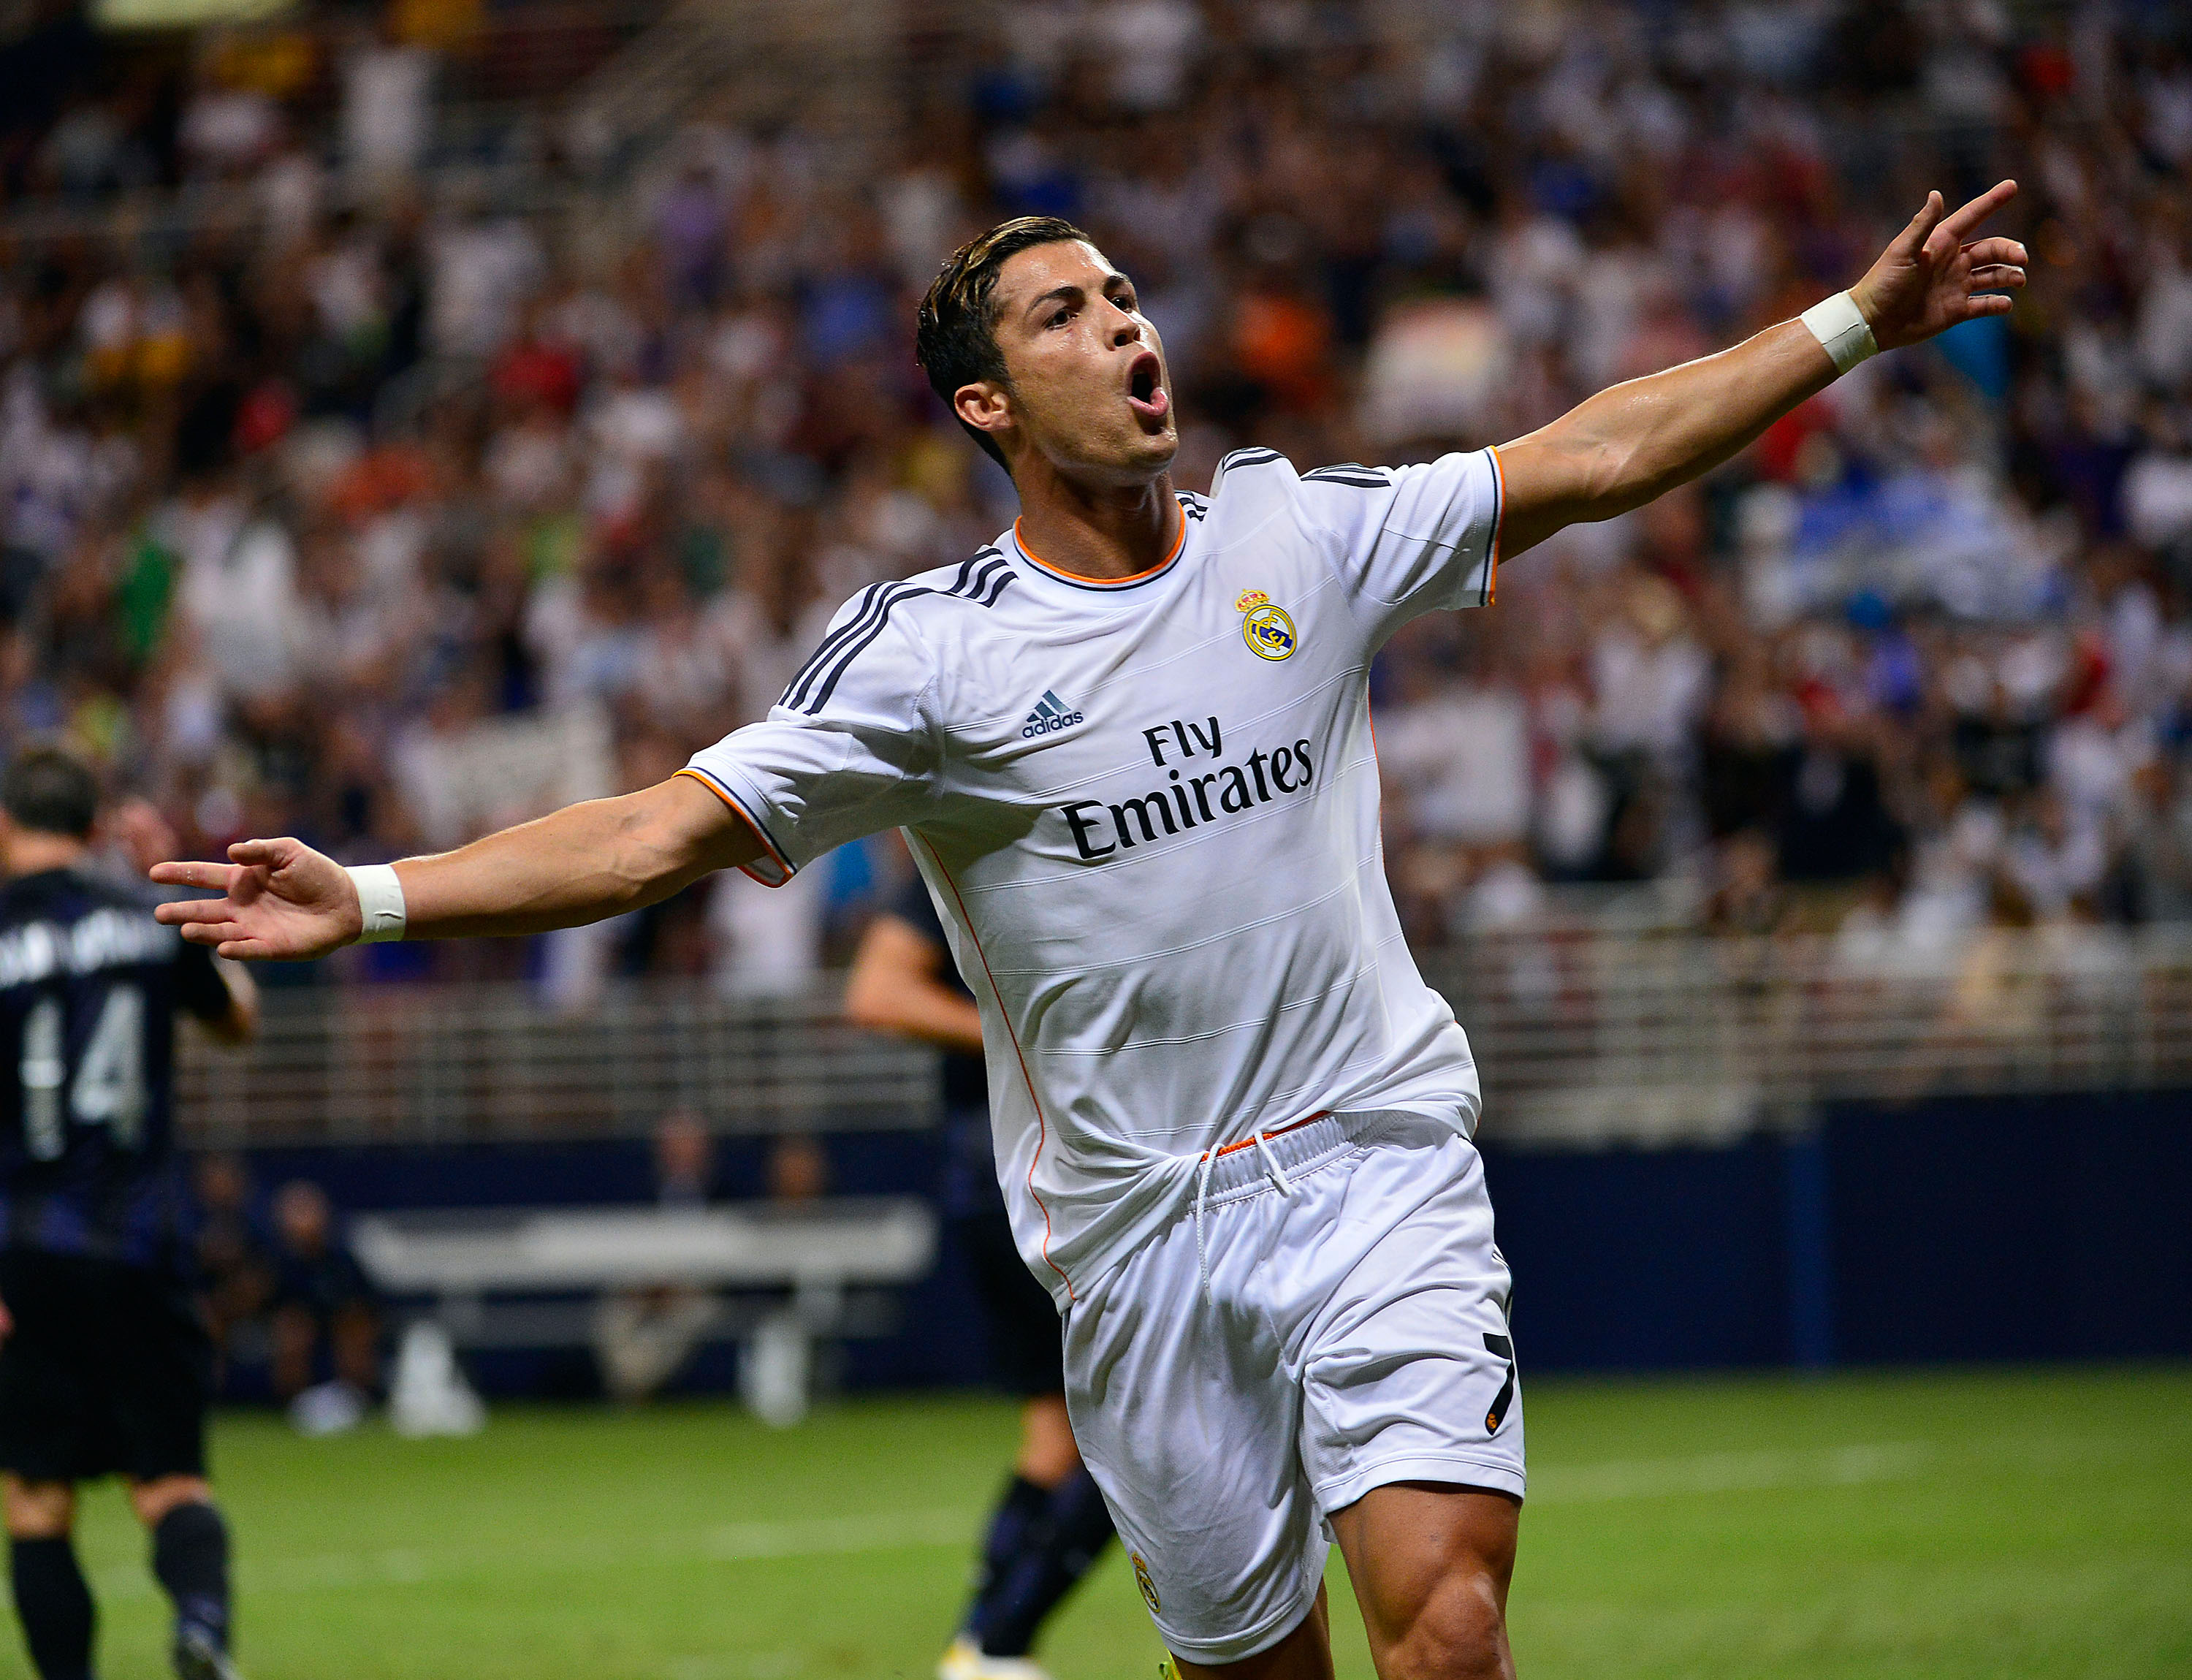 Cristiano Ronaldo Could Sign With Mls In